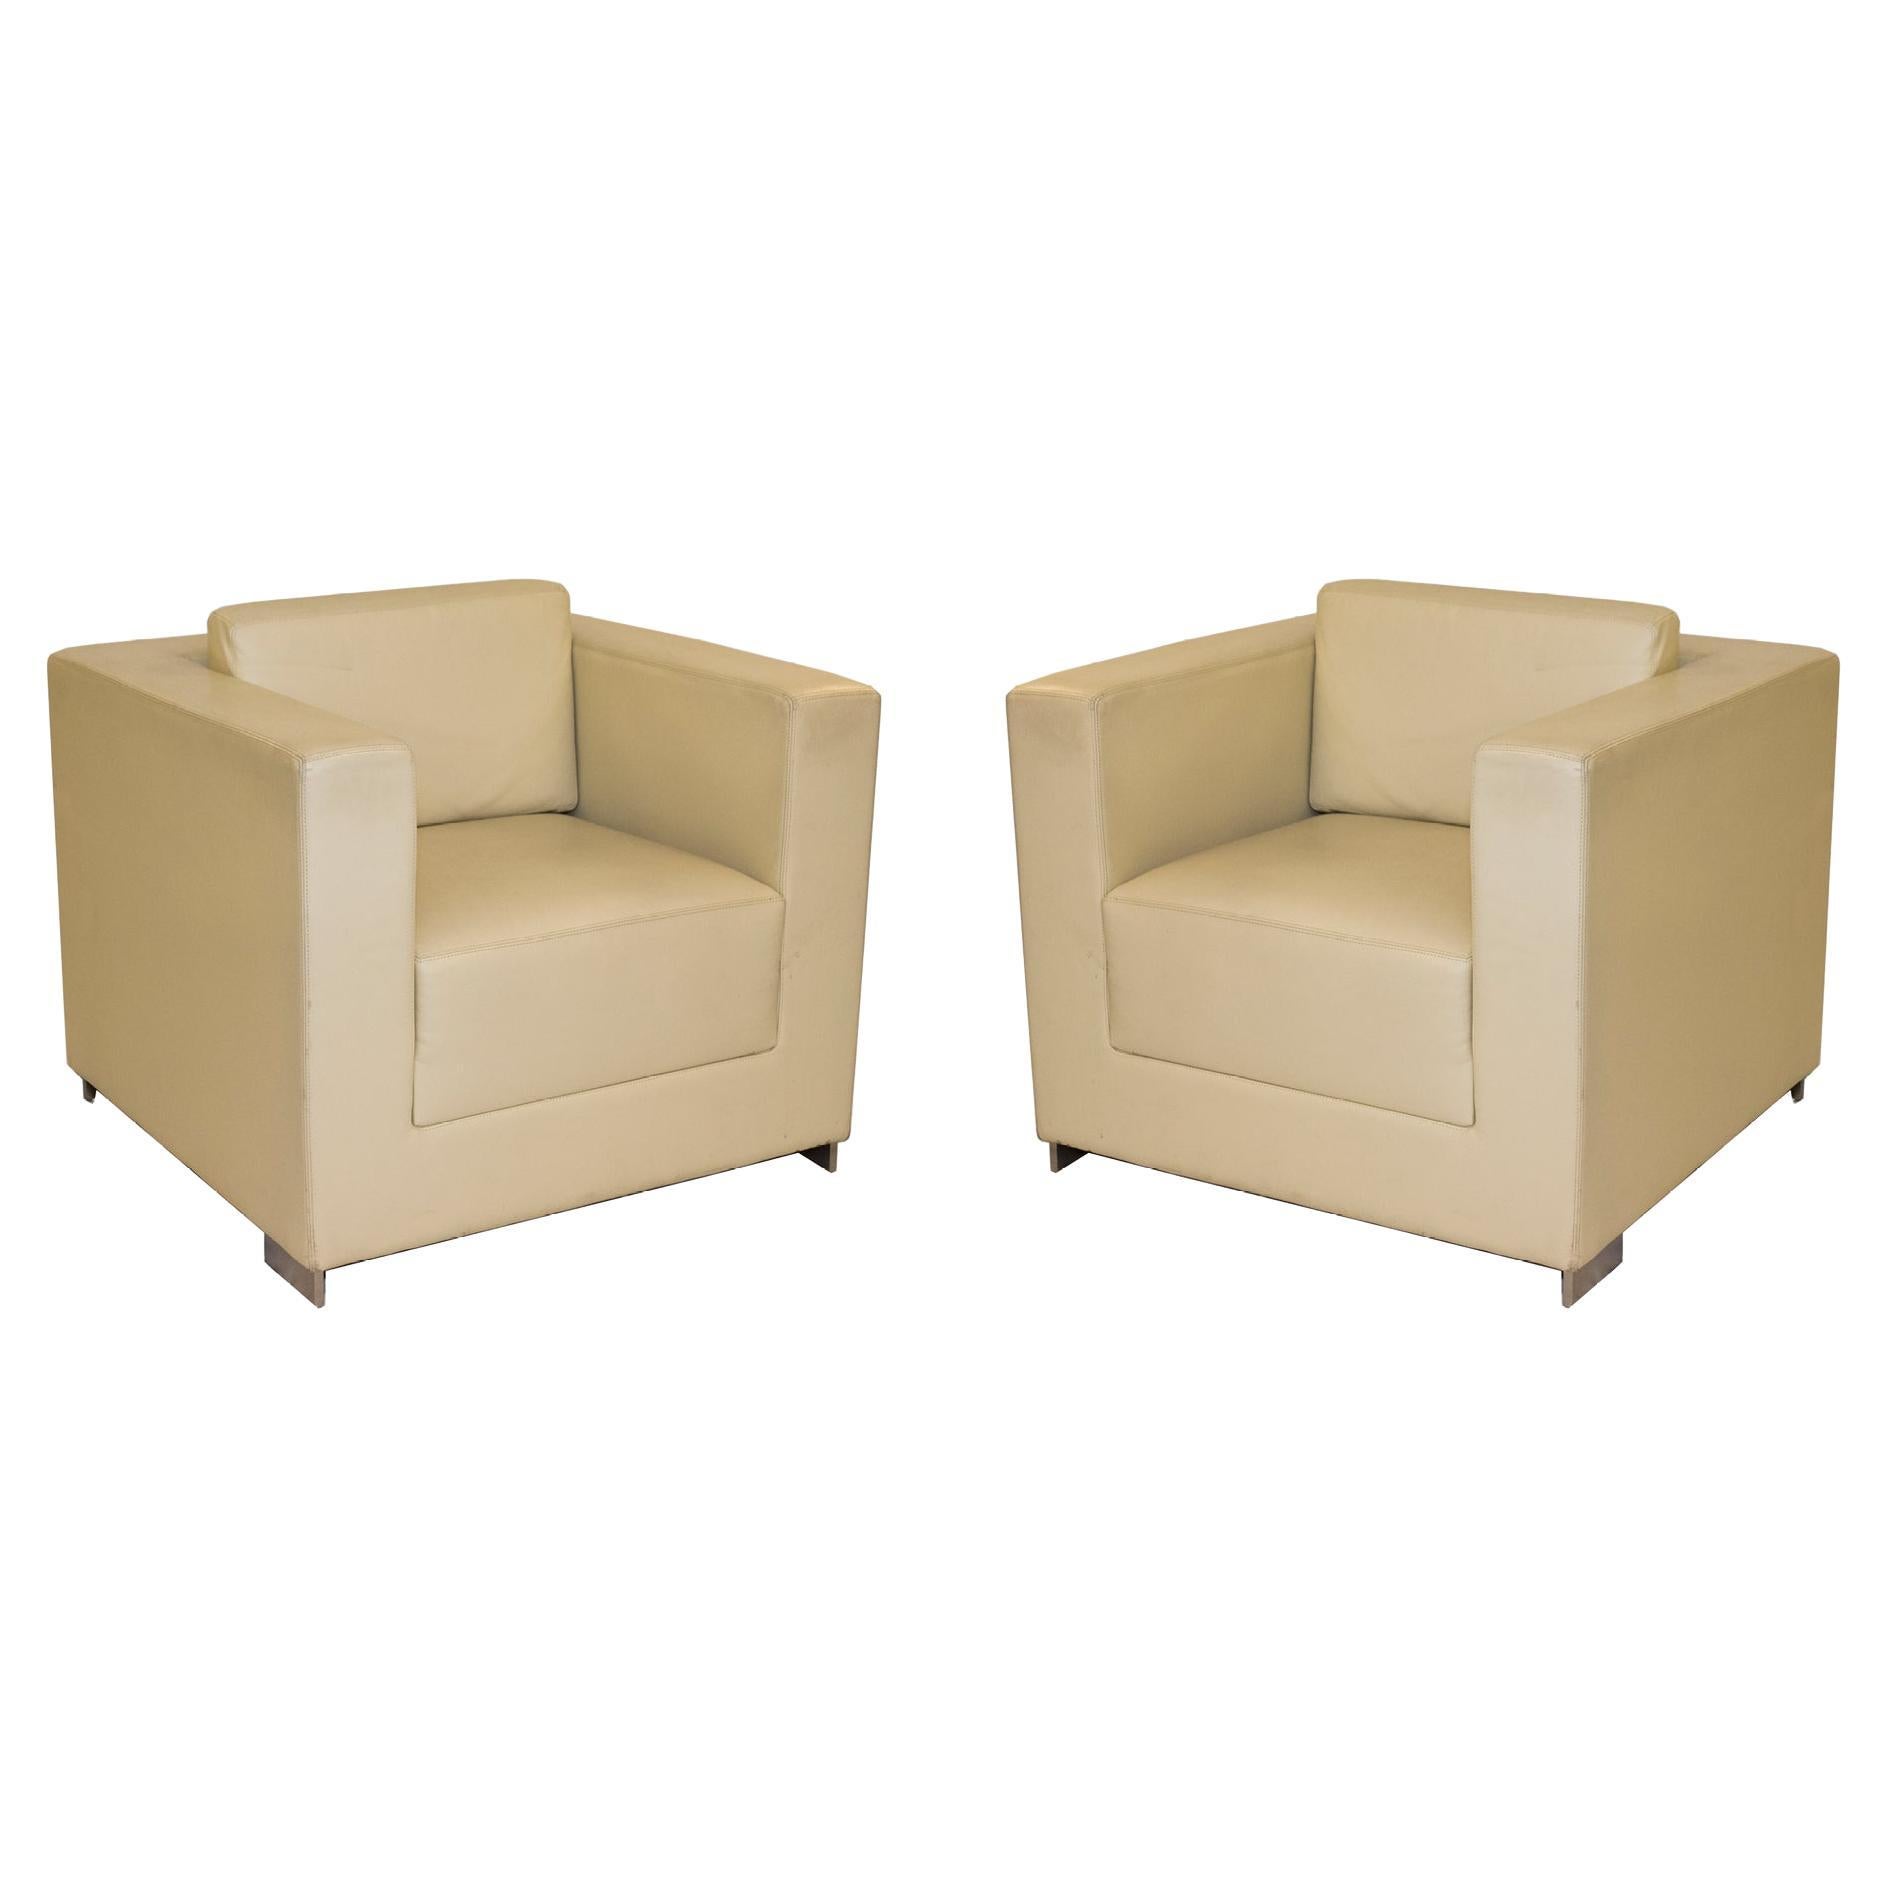 Pair of Cube Lounge Chairs in Creme Leather by Bernhardt Furniture